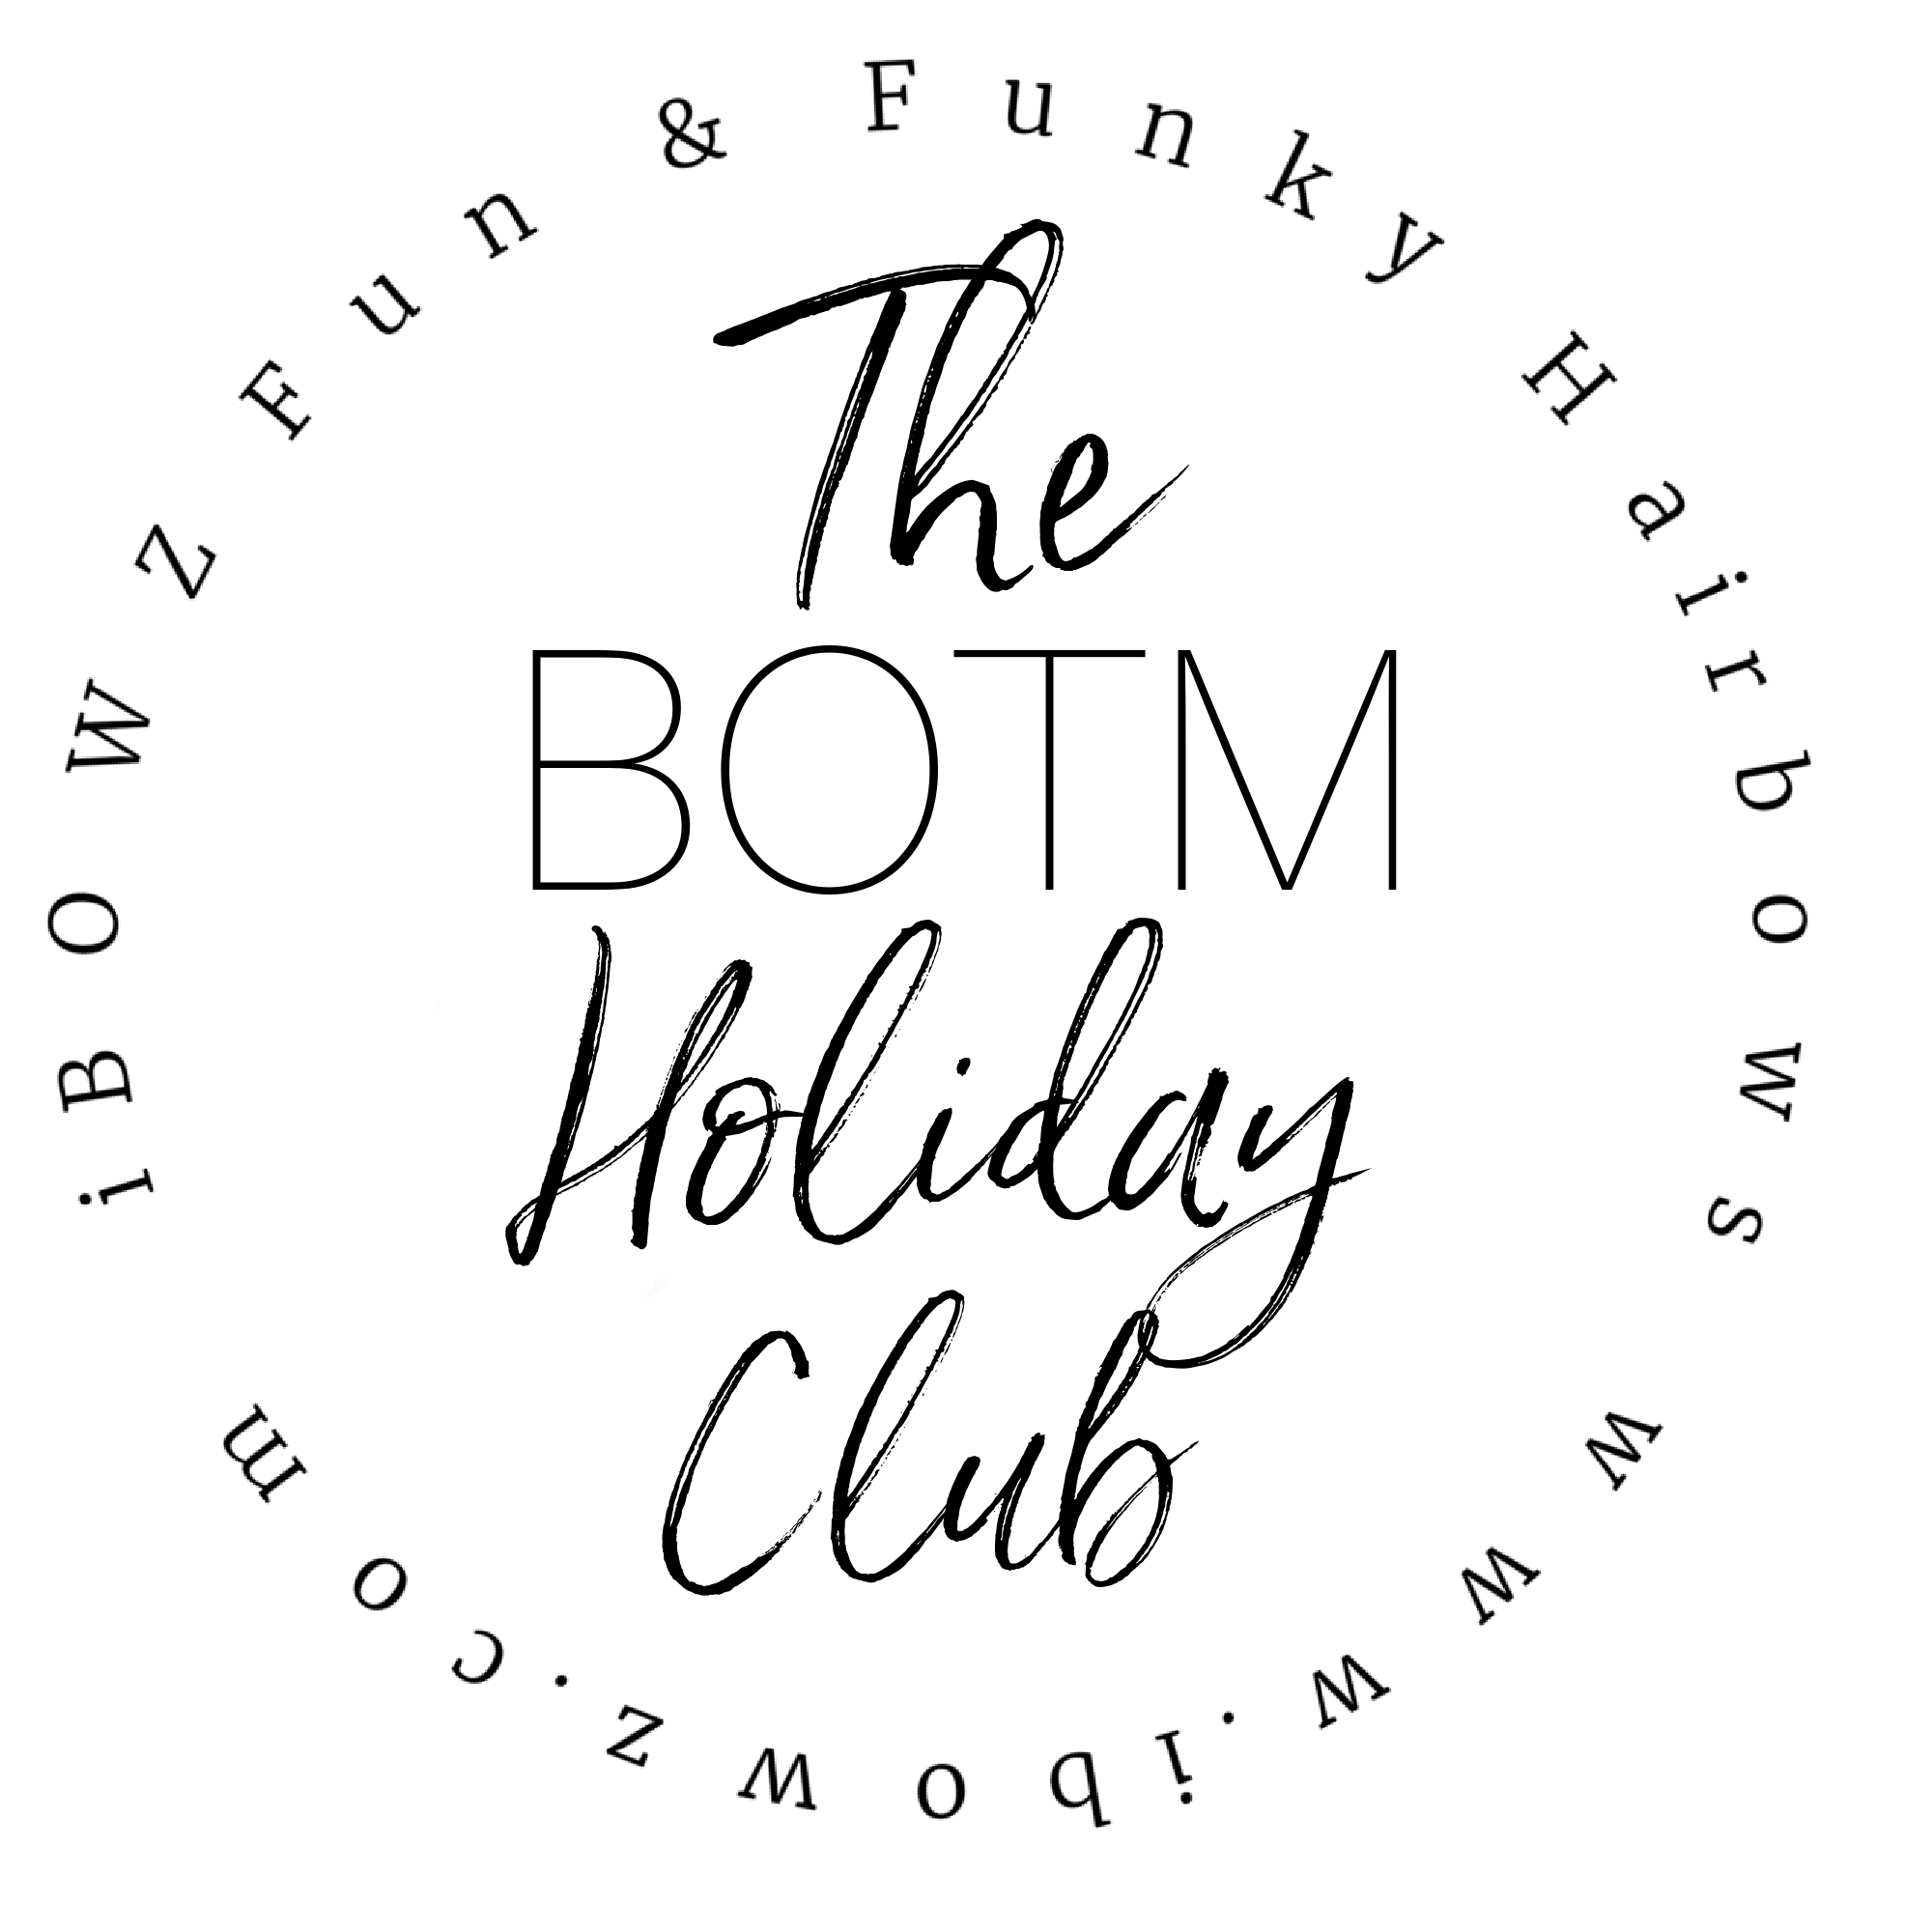 BOTM Holiday Box | Subscription bow club | New Holiday Bow Every Month | iBOWZ Fun & Funky hairbows